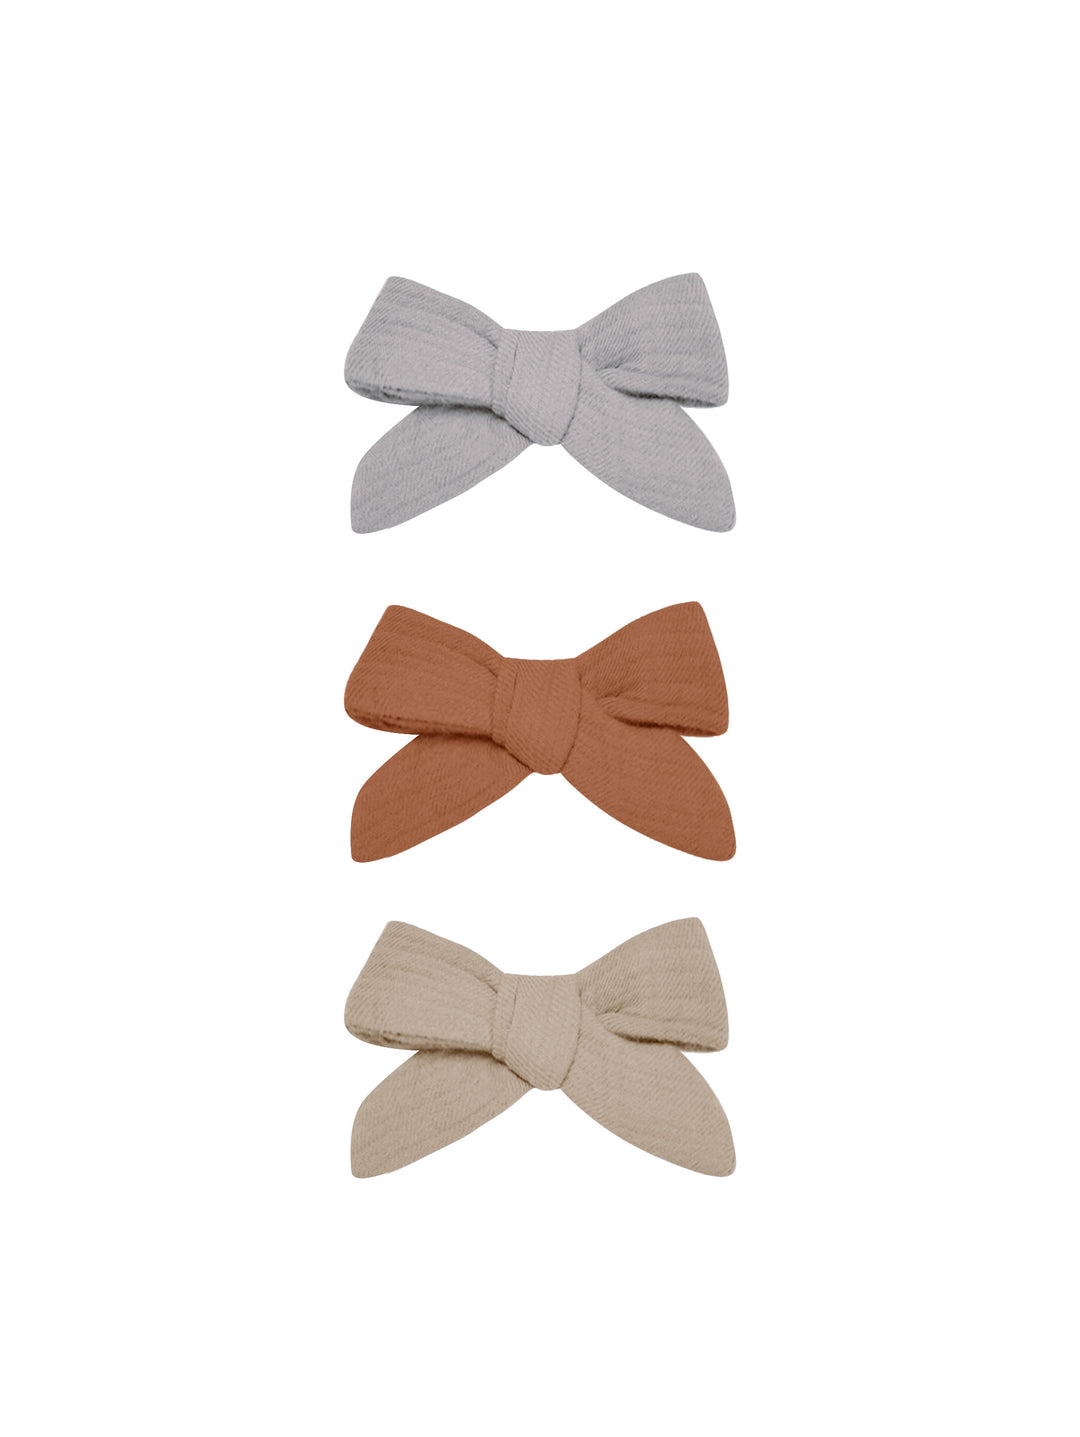 Bow W/ Clip Set of 3, Periwinkle + Clay + Oat